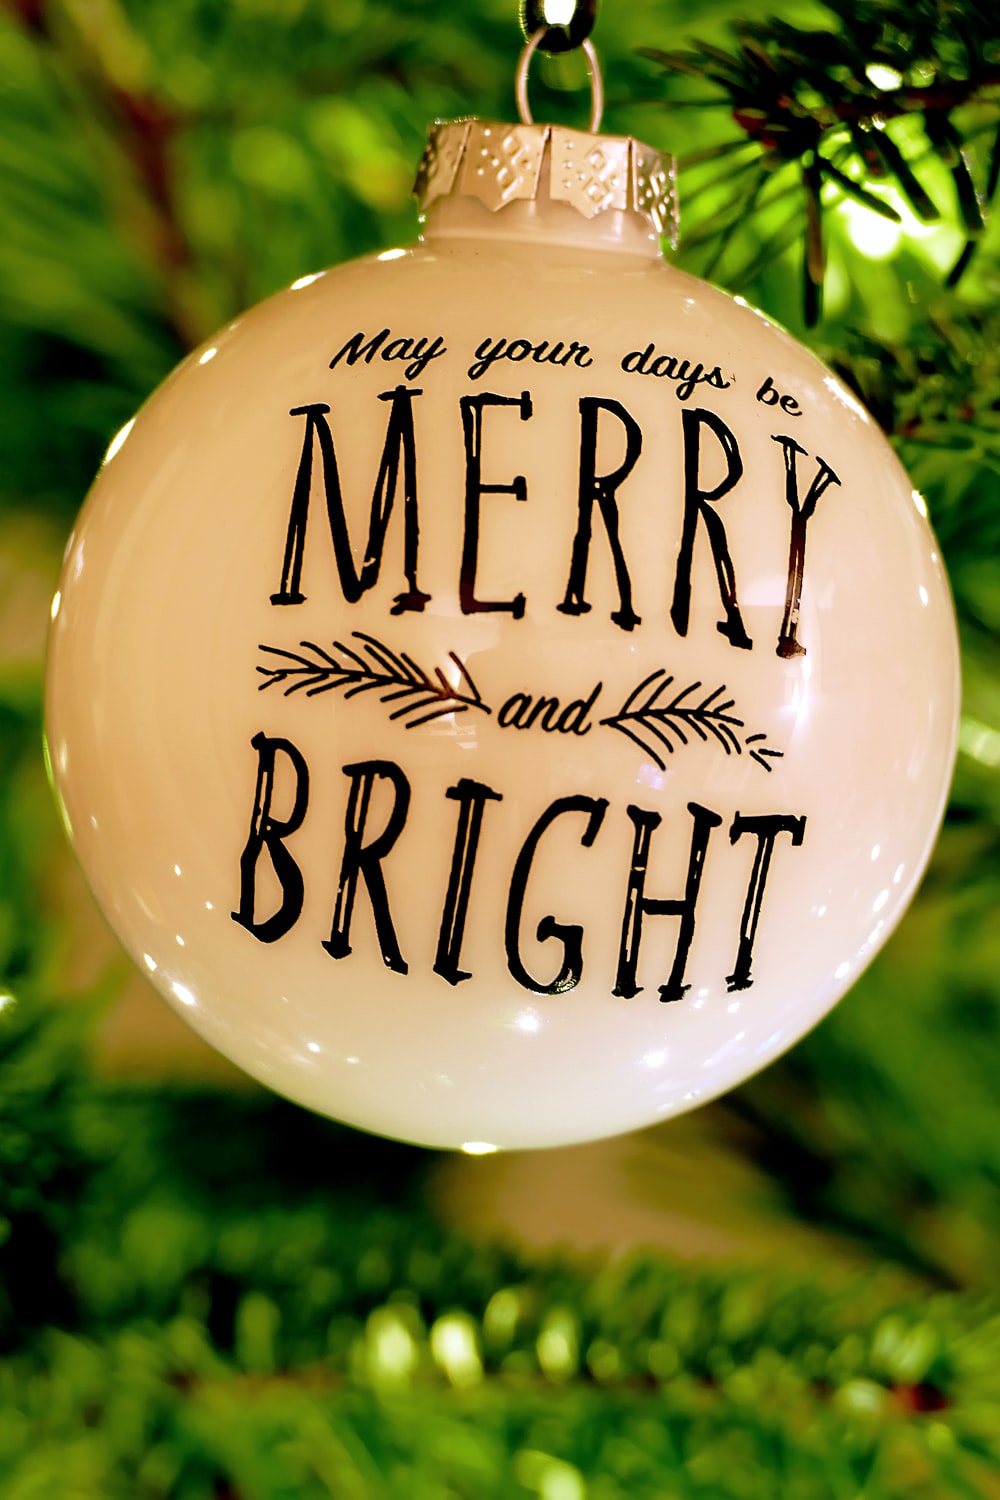 white and black Merry Bright Christmas bauble photo